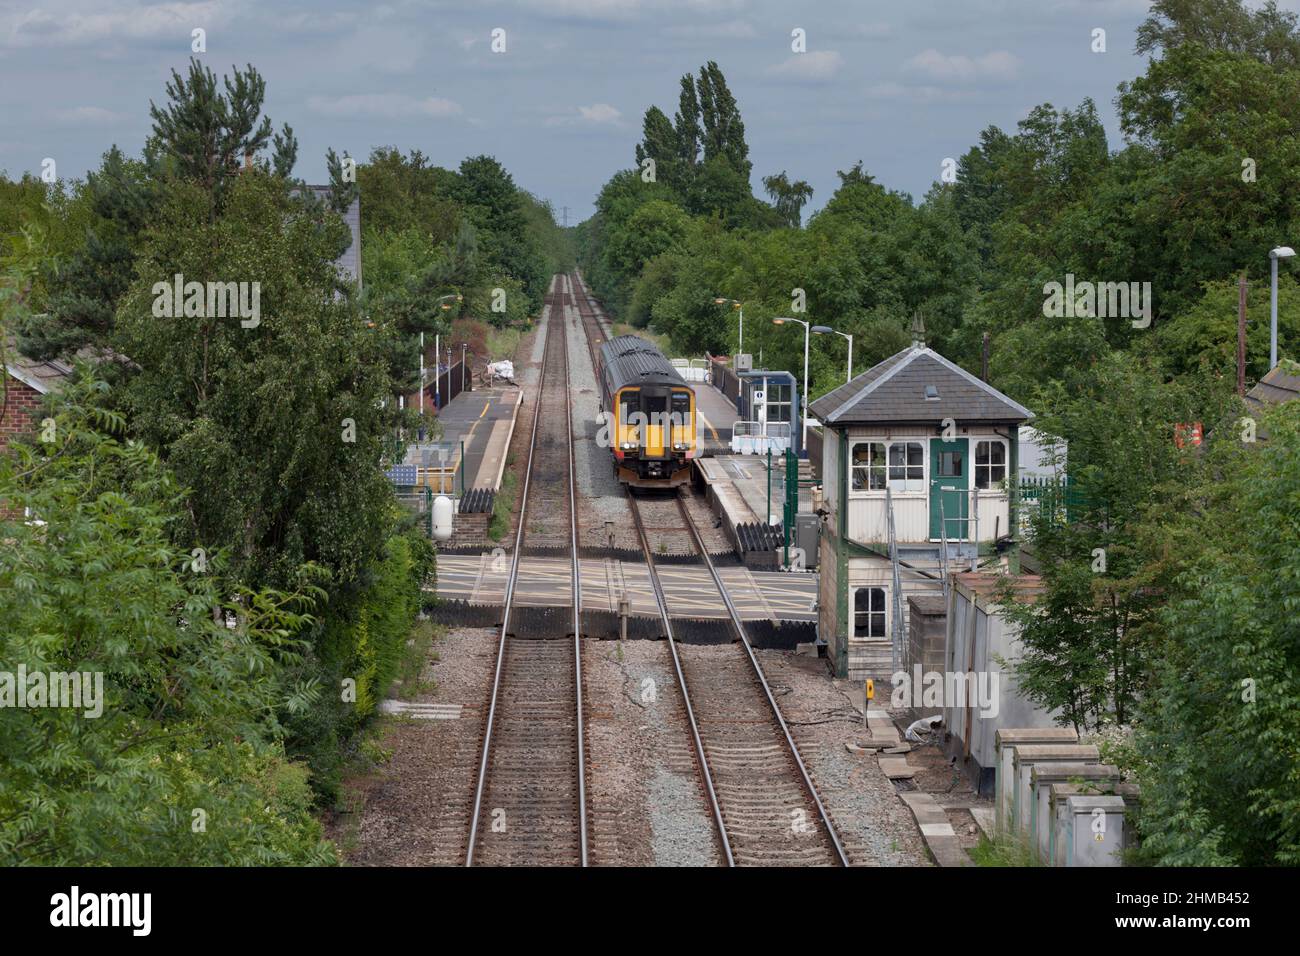 East Midlands trains class 156 sprinter train 156405 at Lowdham railway station (East of Nottingham)  with the level crossing and closed signal box Stock Photo